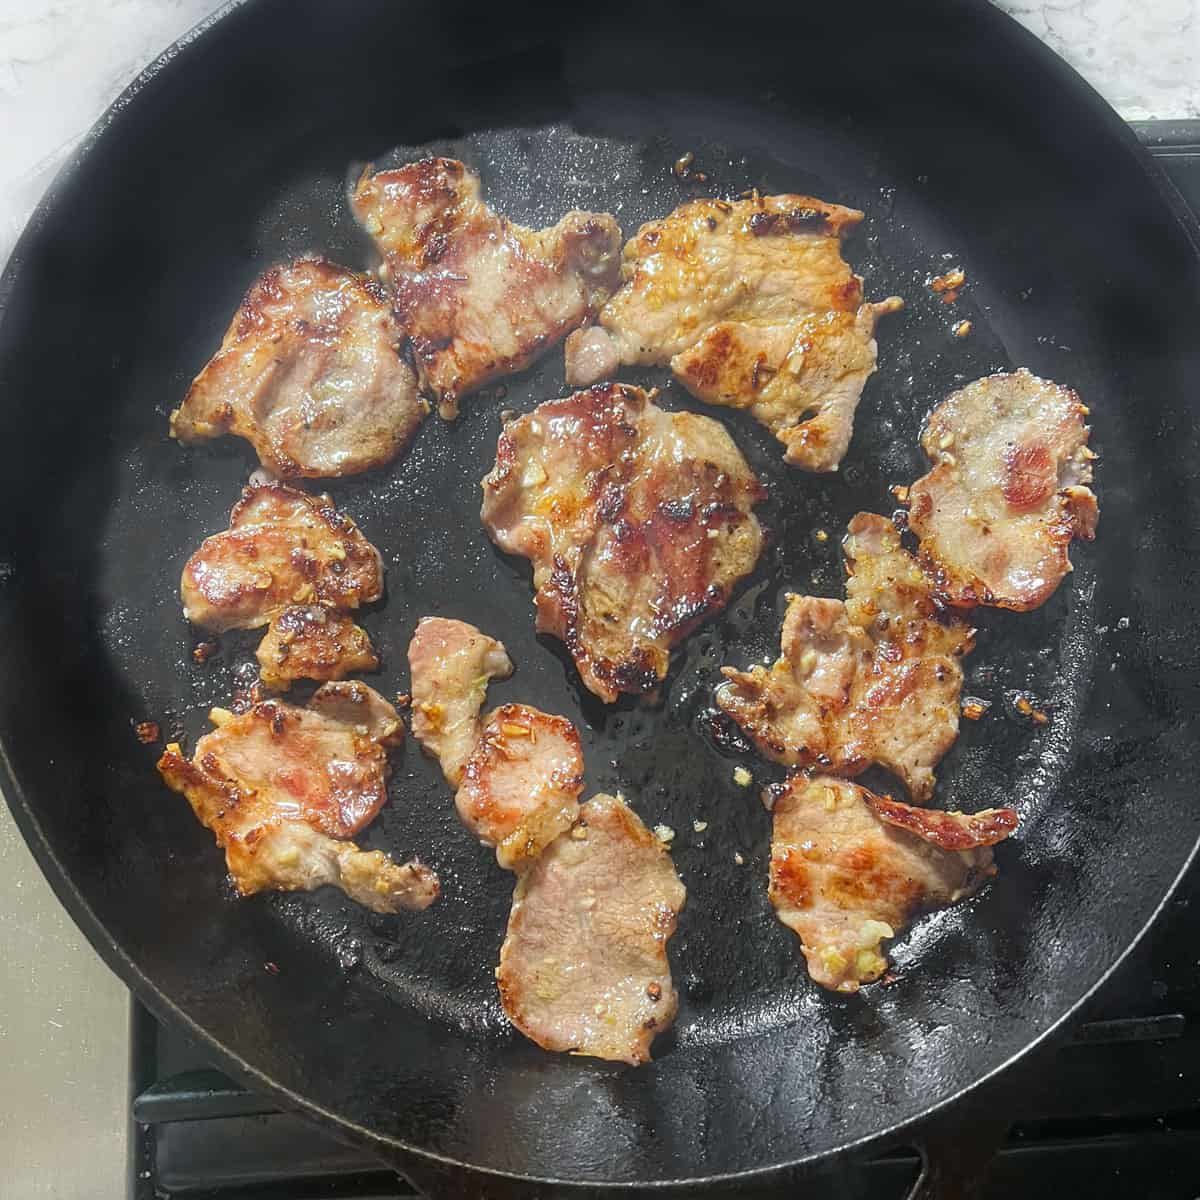 Pieces of marinated pork searing and caramelizing in a cast iron skillet